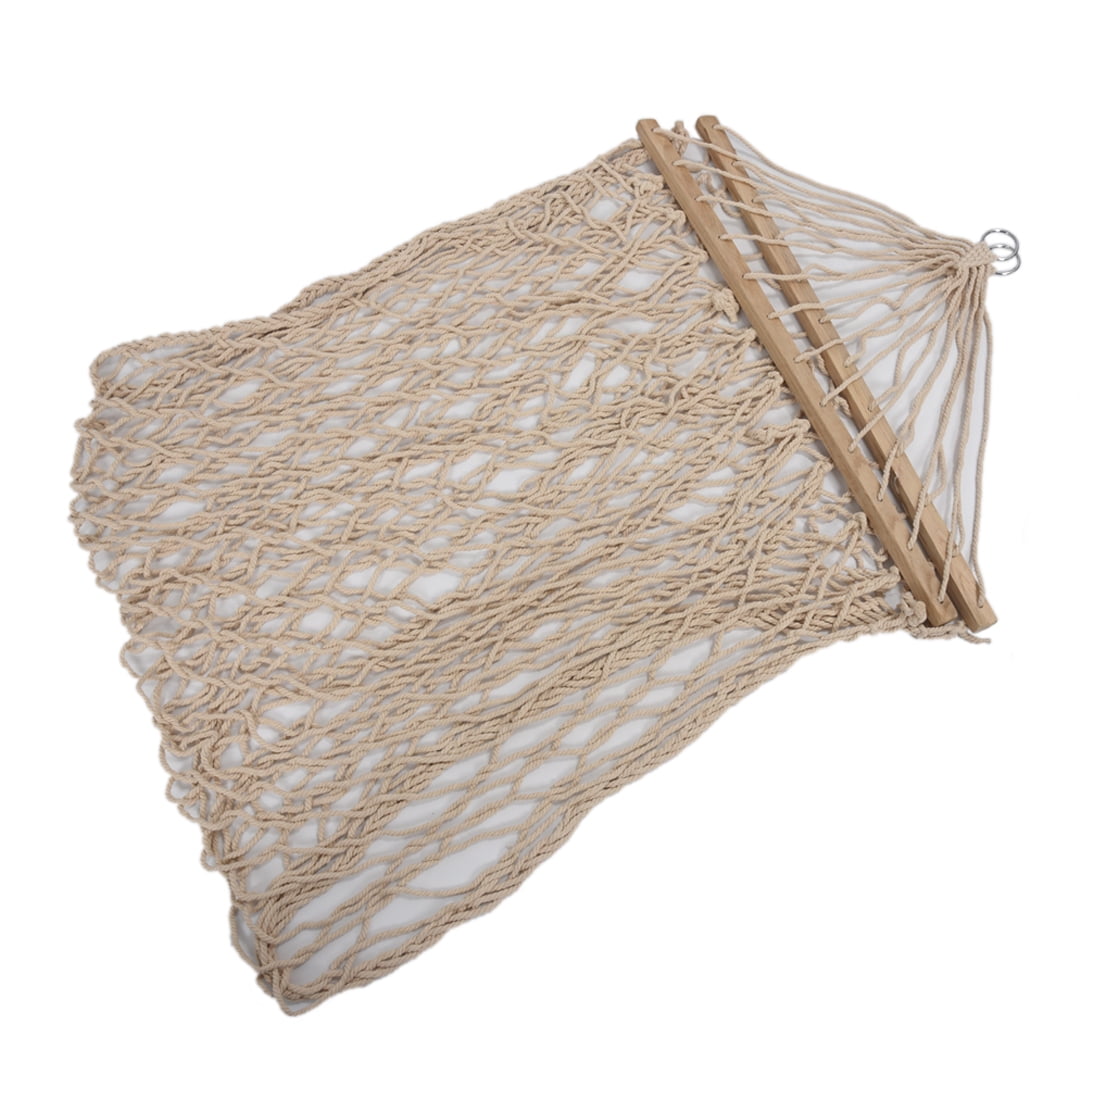 Details about   JW_ White Outdoor Mesh Cotton Rope Swing Hammock Hanging on the Porch or Beach 